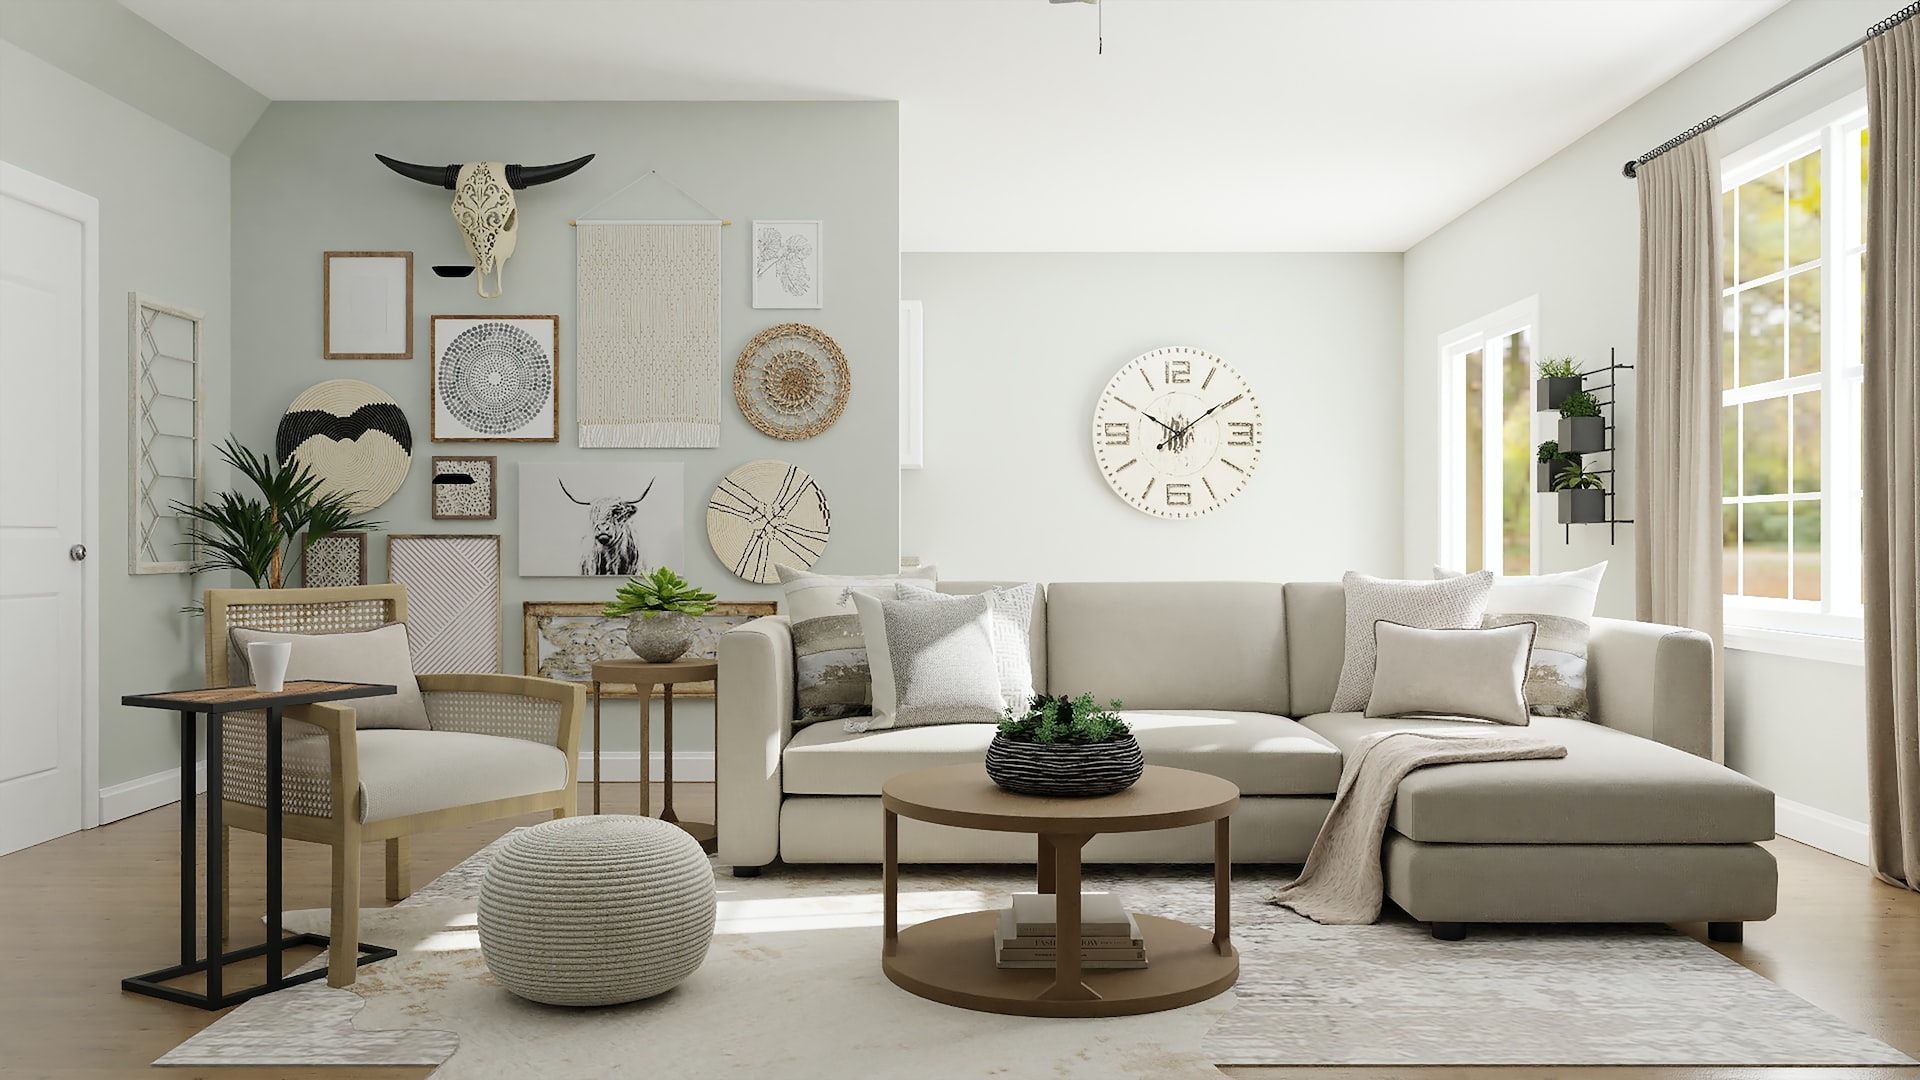 4 Home Decor Styles You Could Consider For Your Home